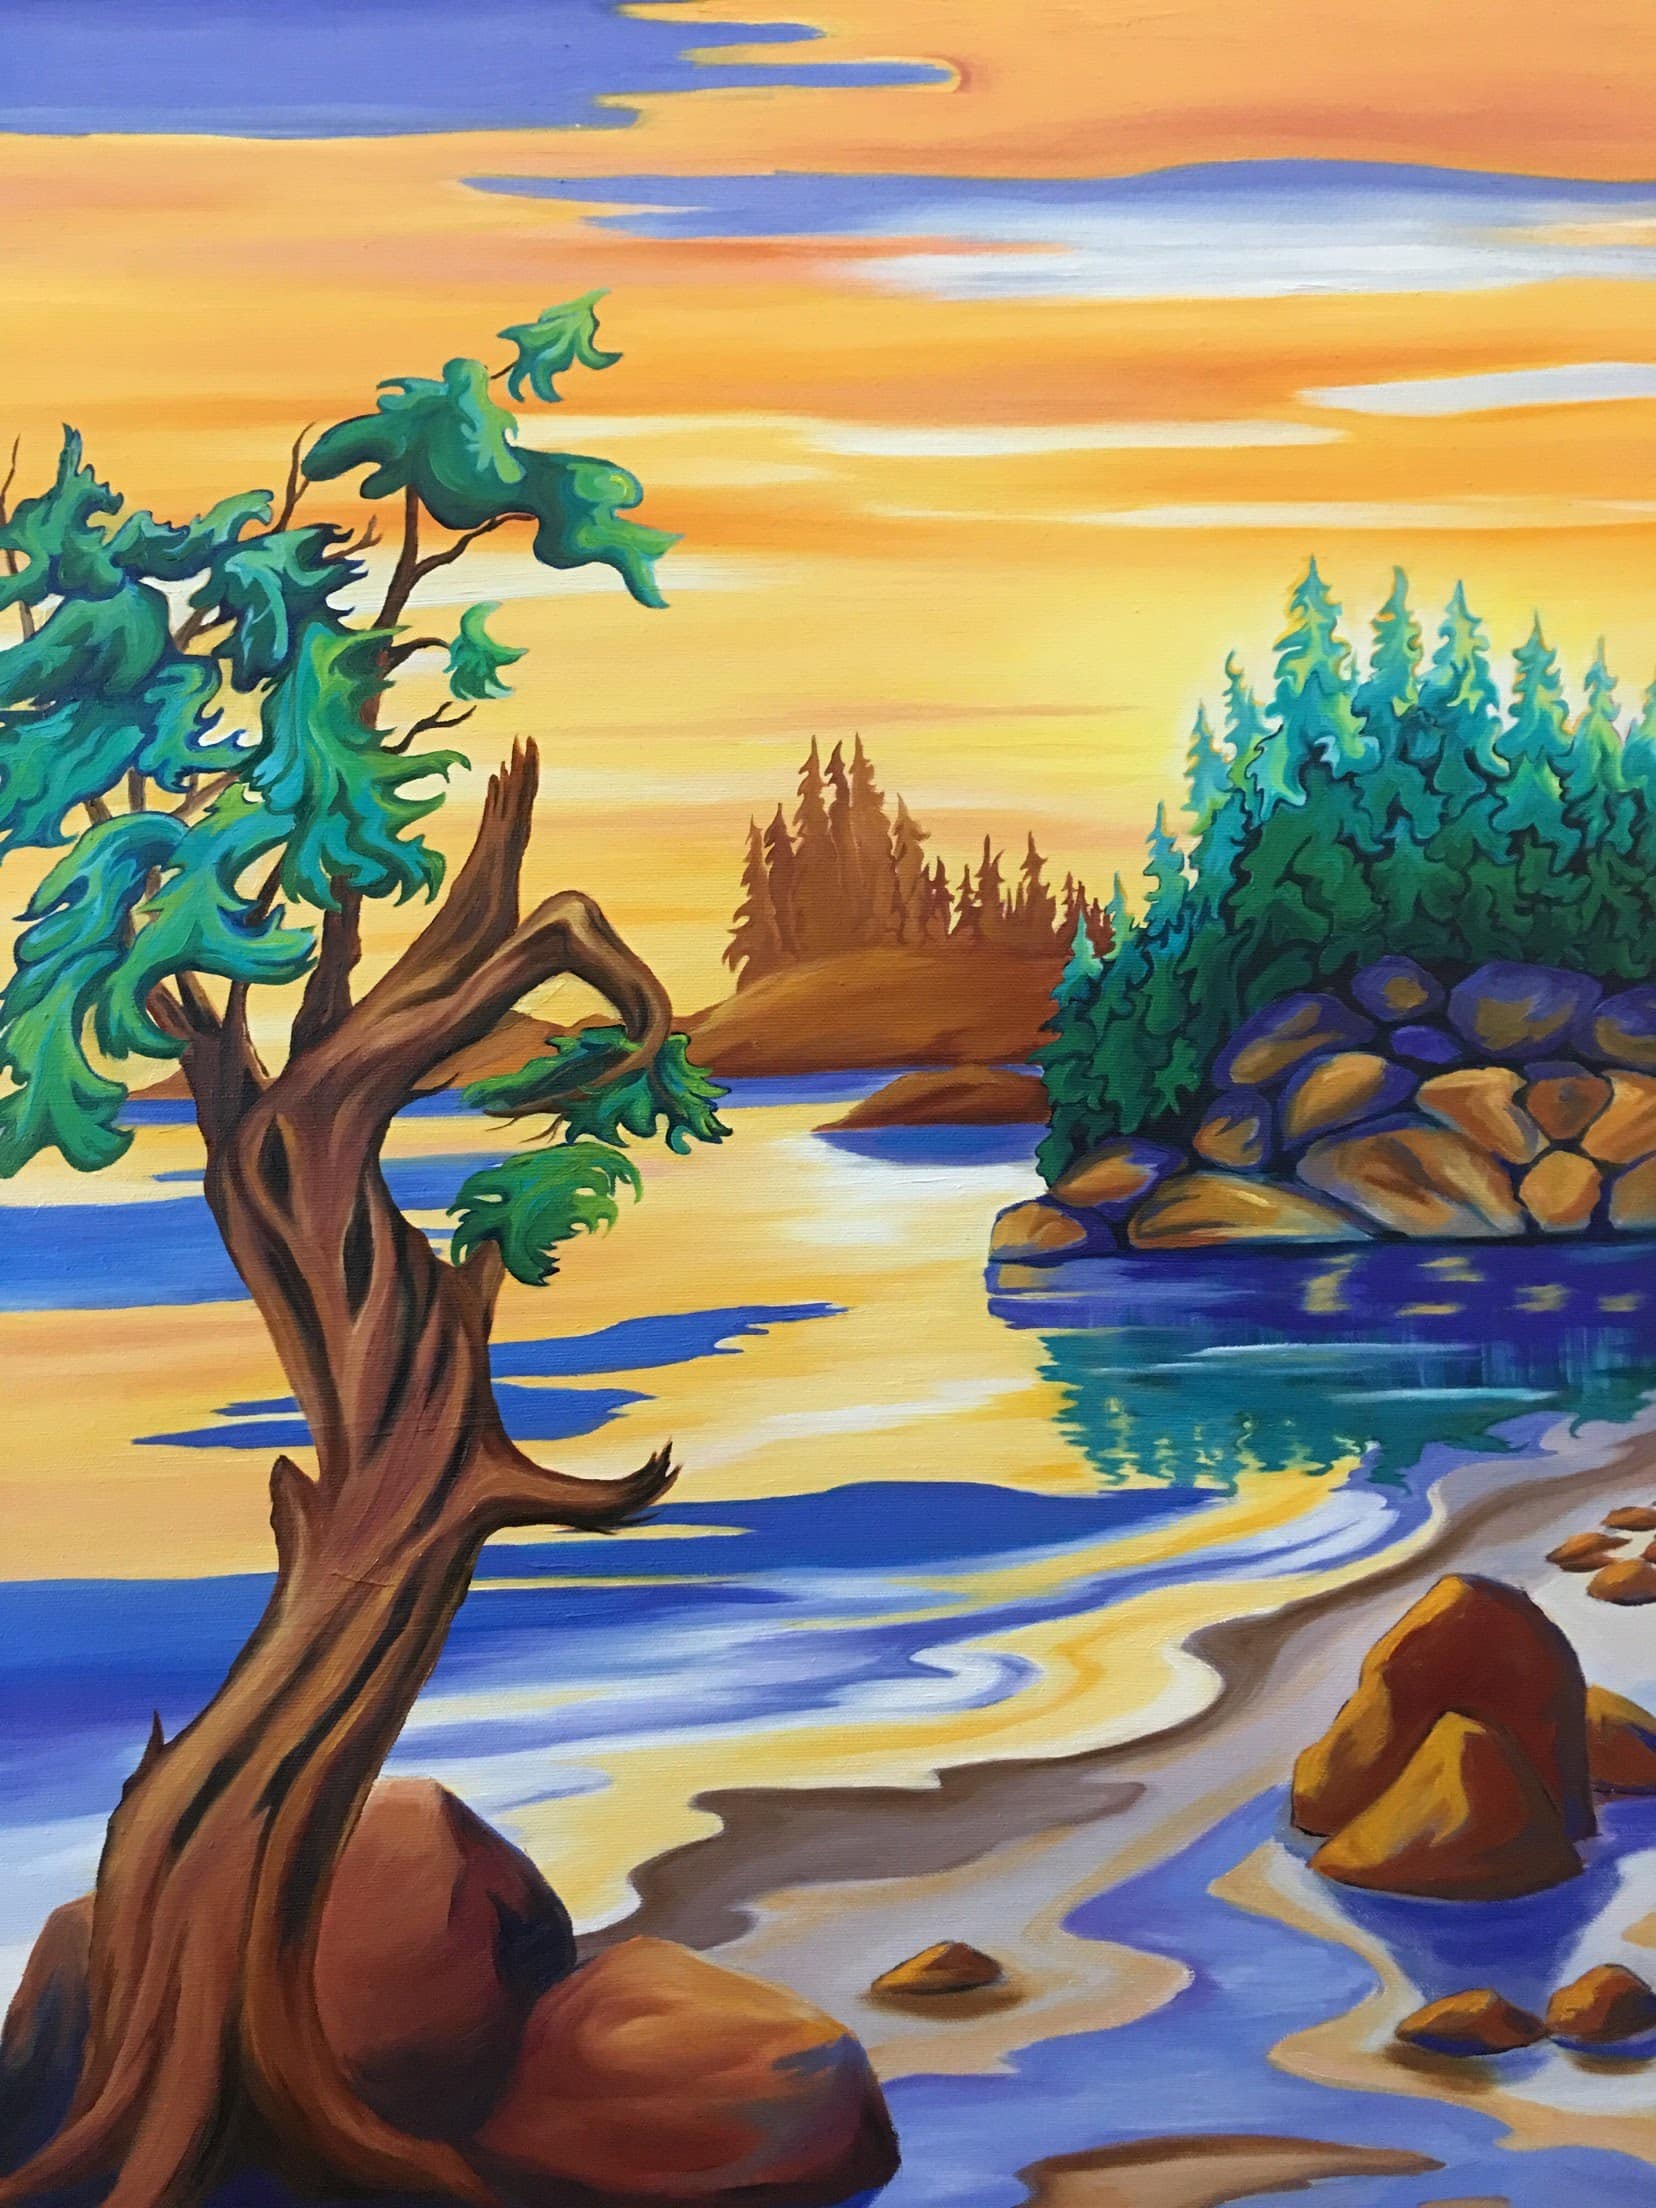 West Coast Painting by Janice Gallant https://janicegallant.com/